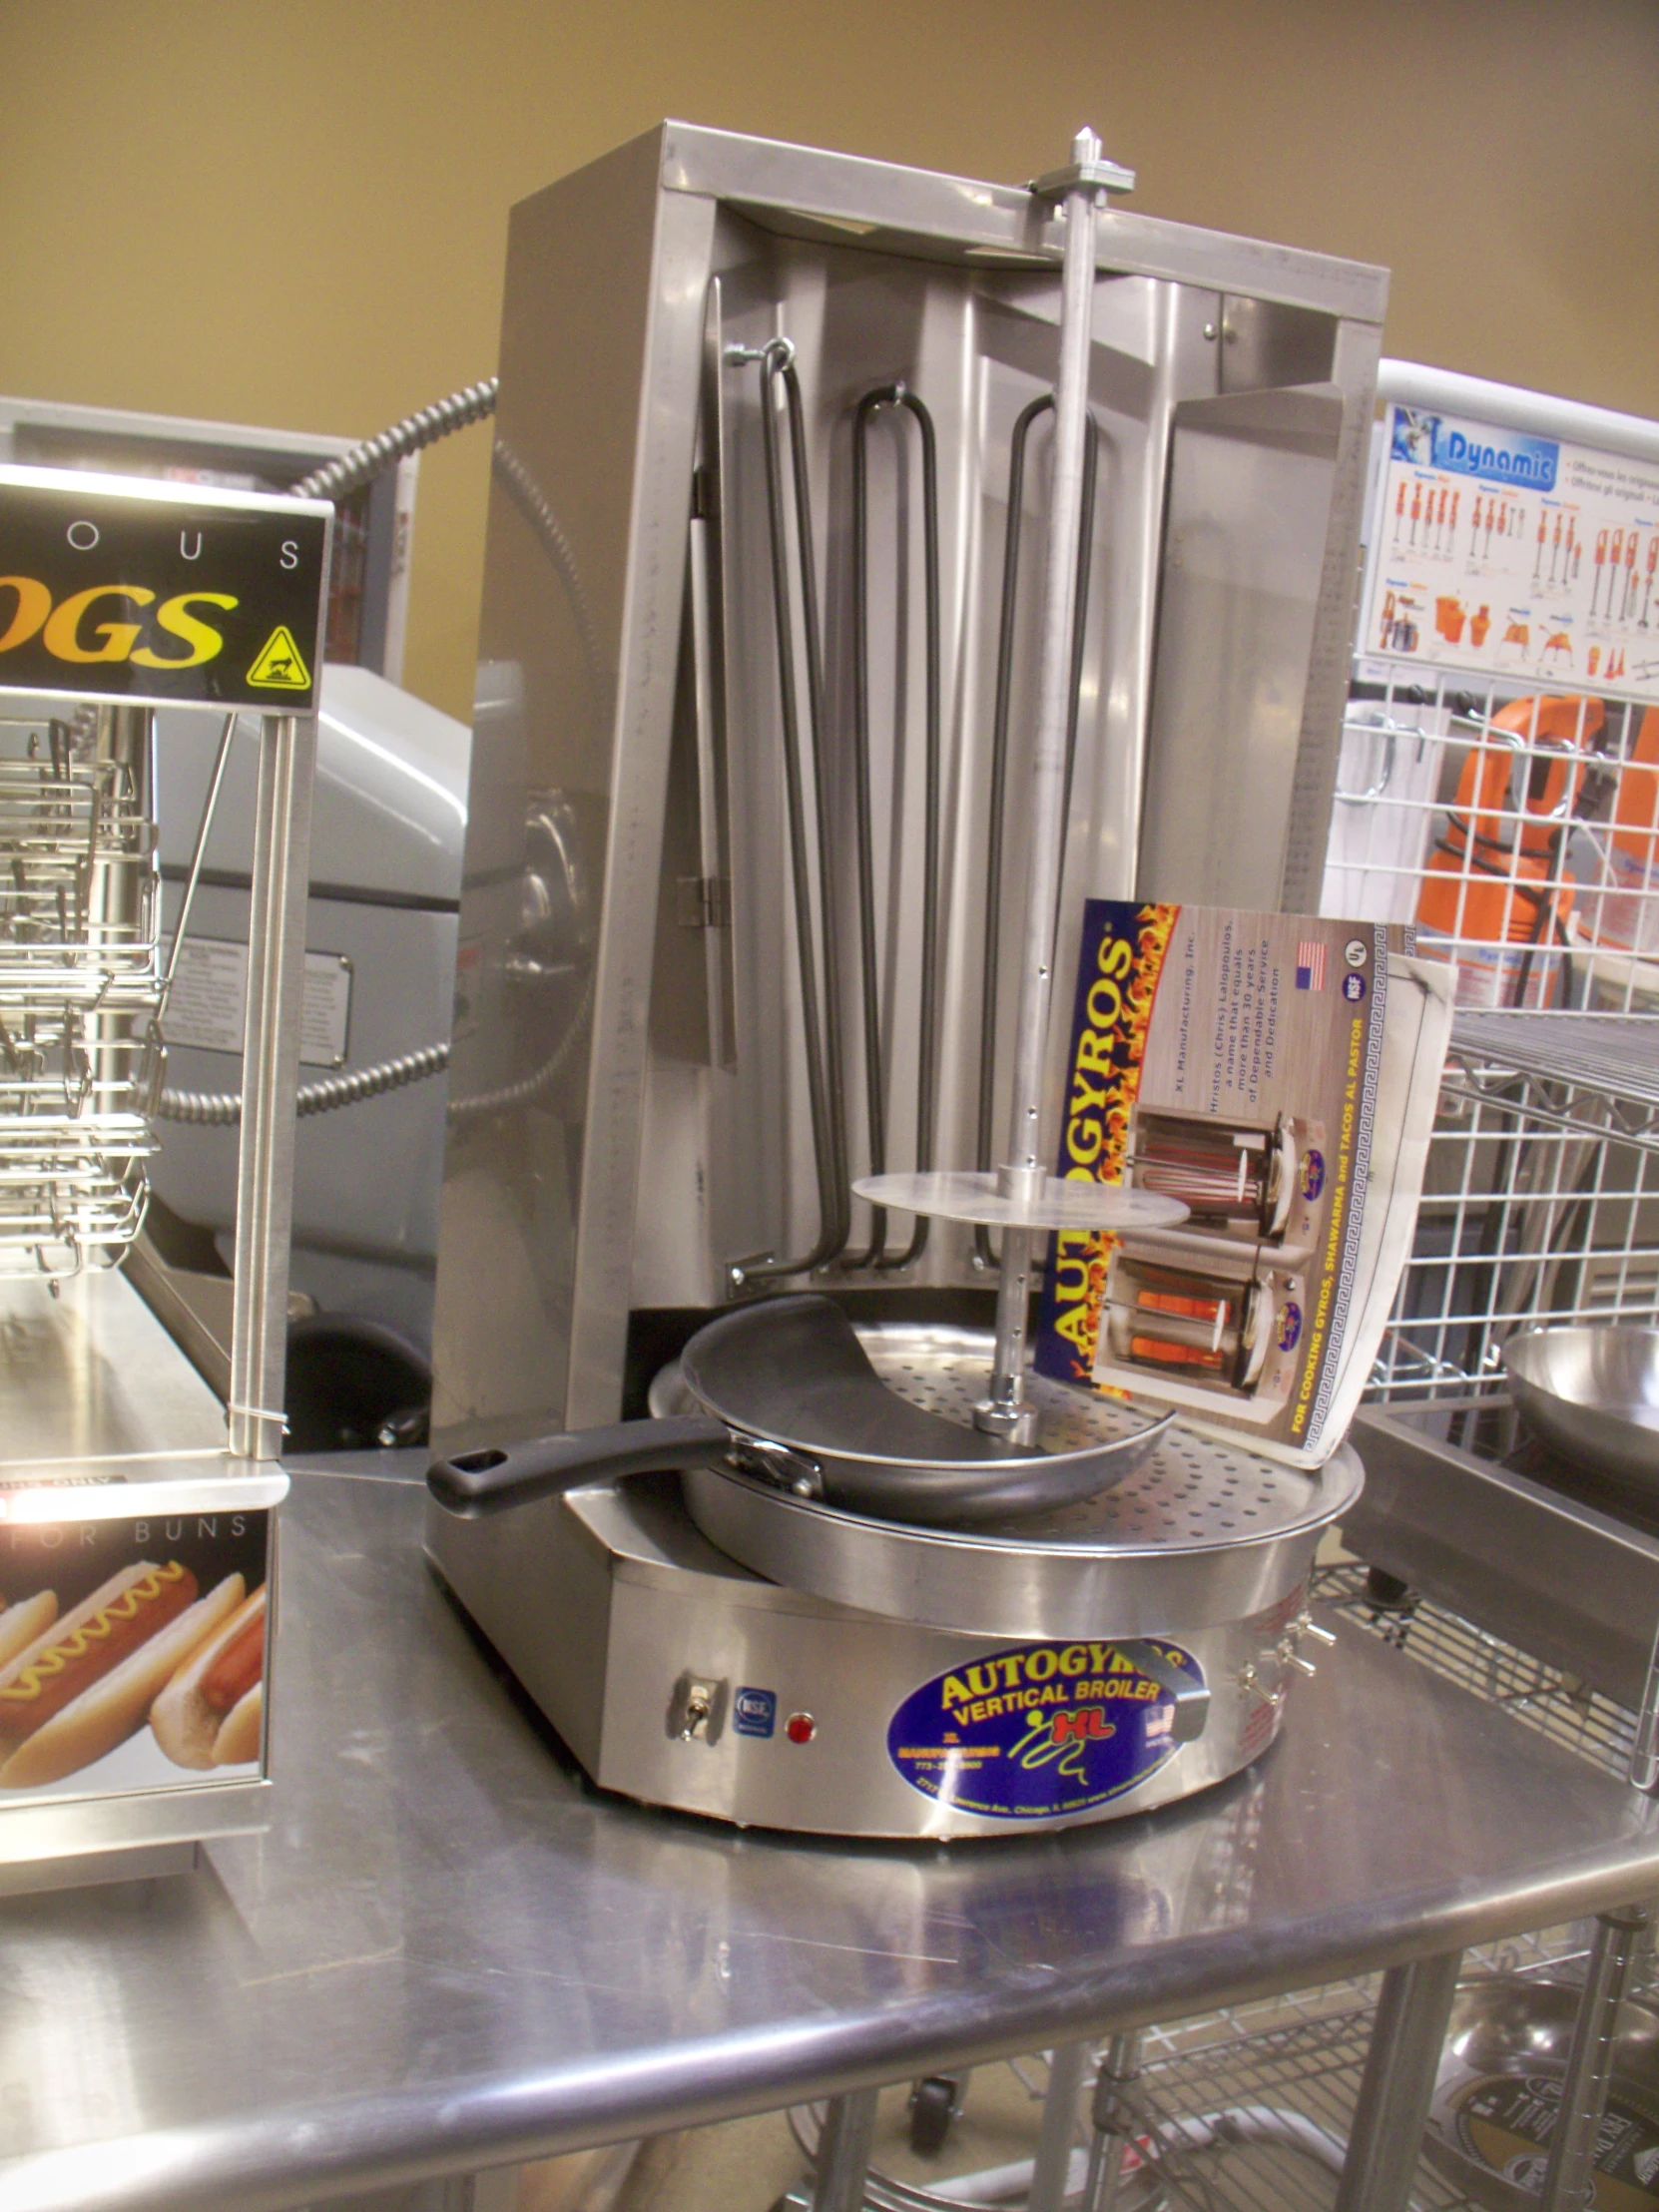 a counter with a silver metal machine next to some packaged foods